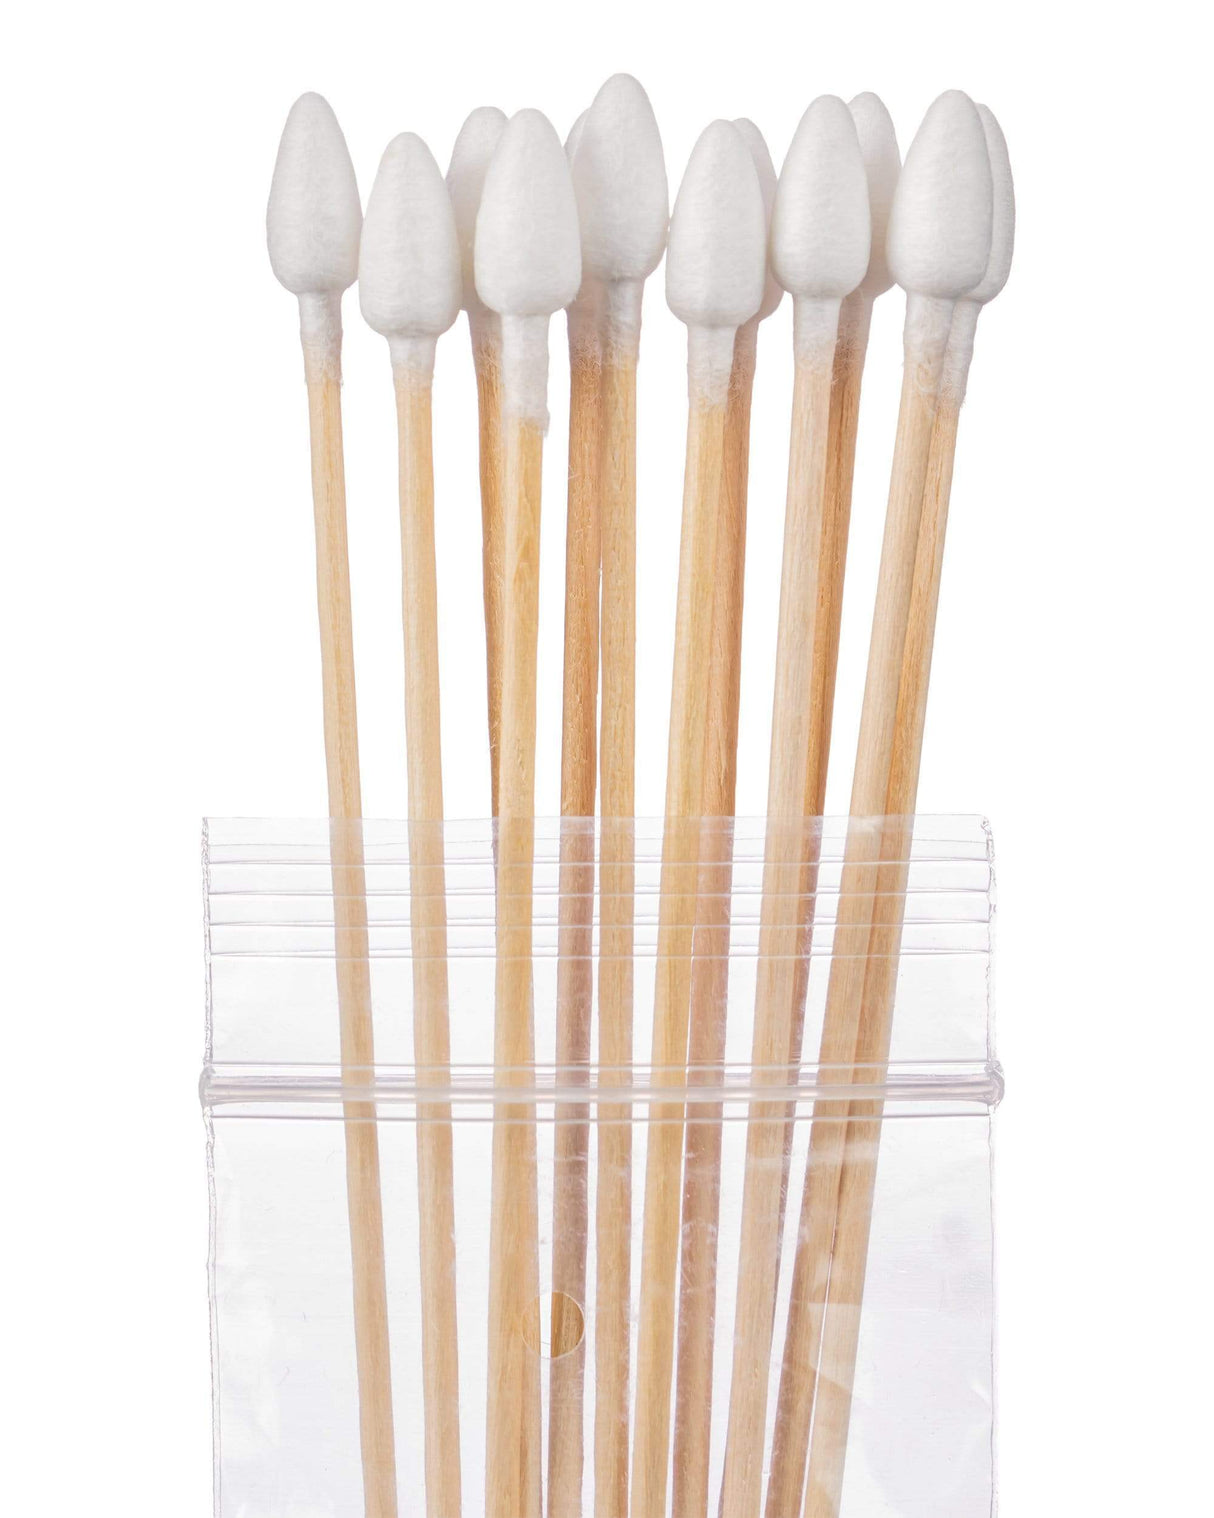 Higher Standards Supreme Cleaning Kit cotton swabs in clear container, USA made organic